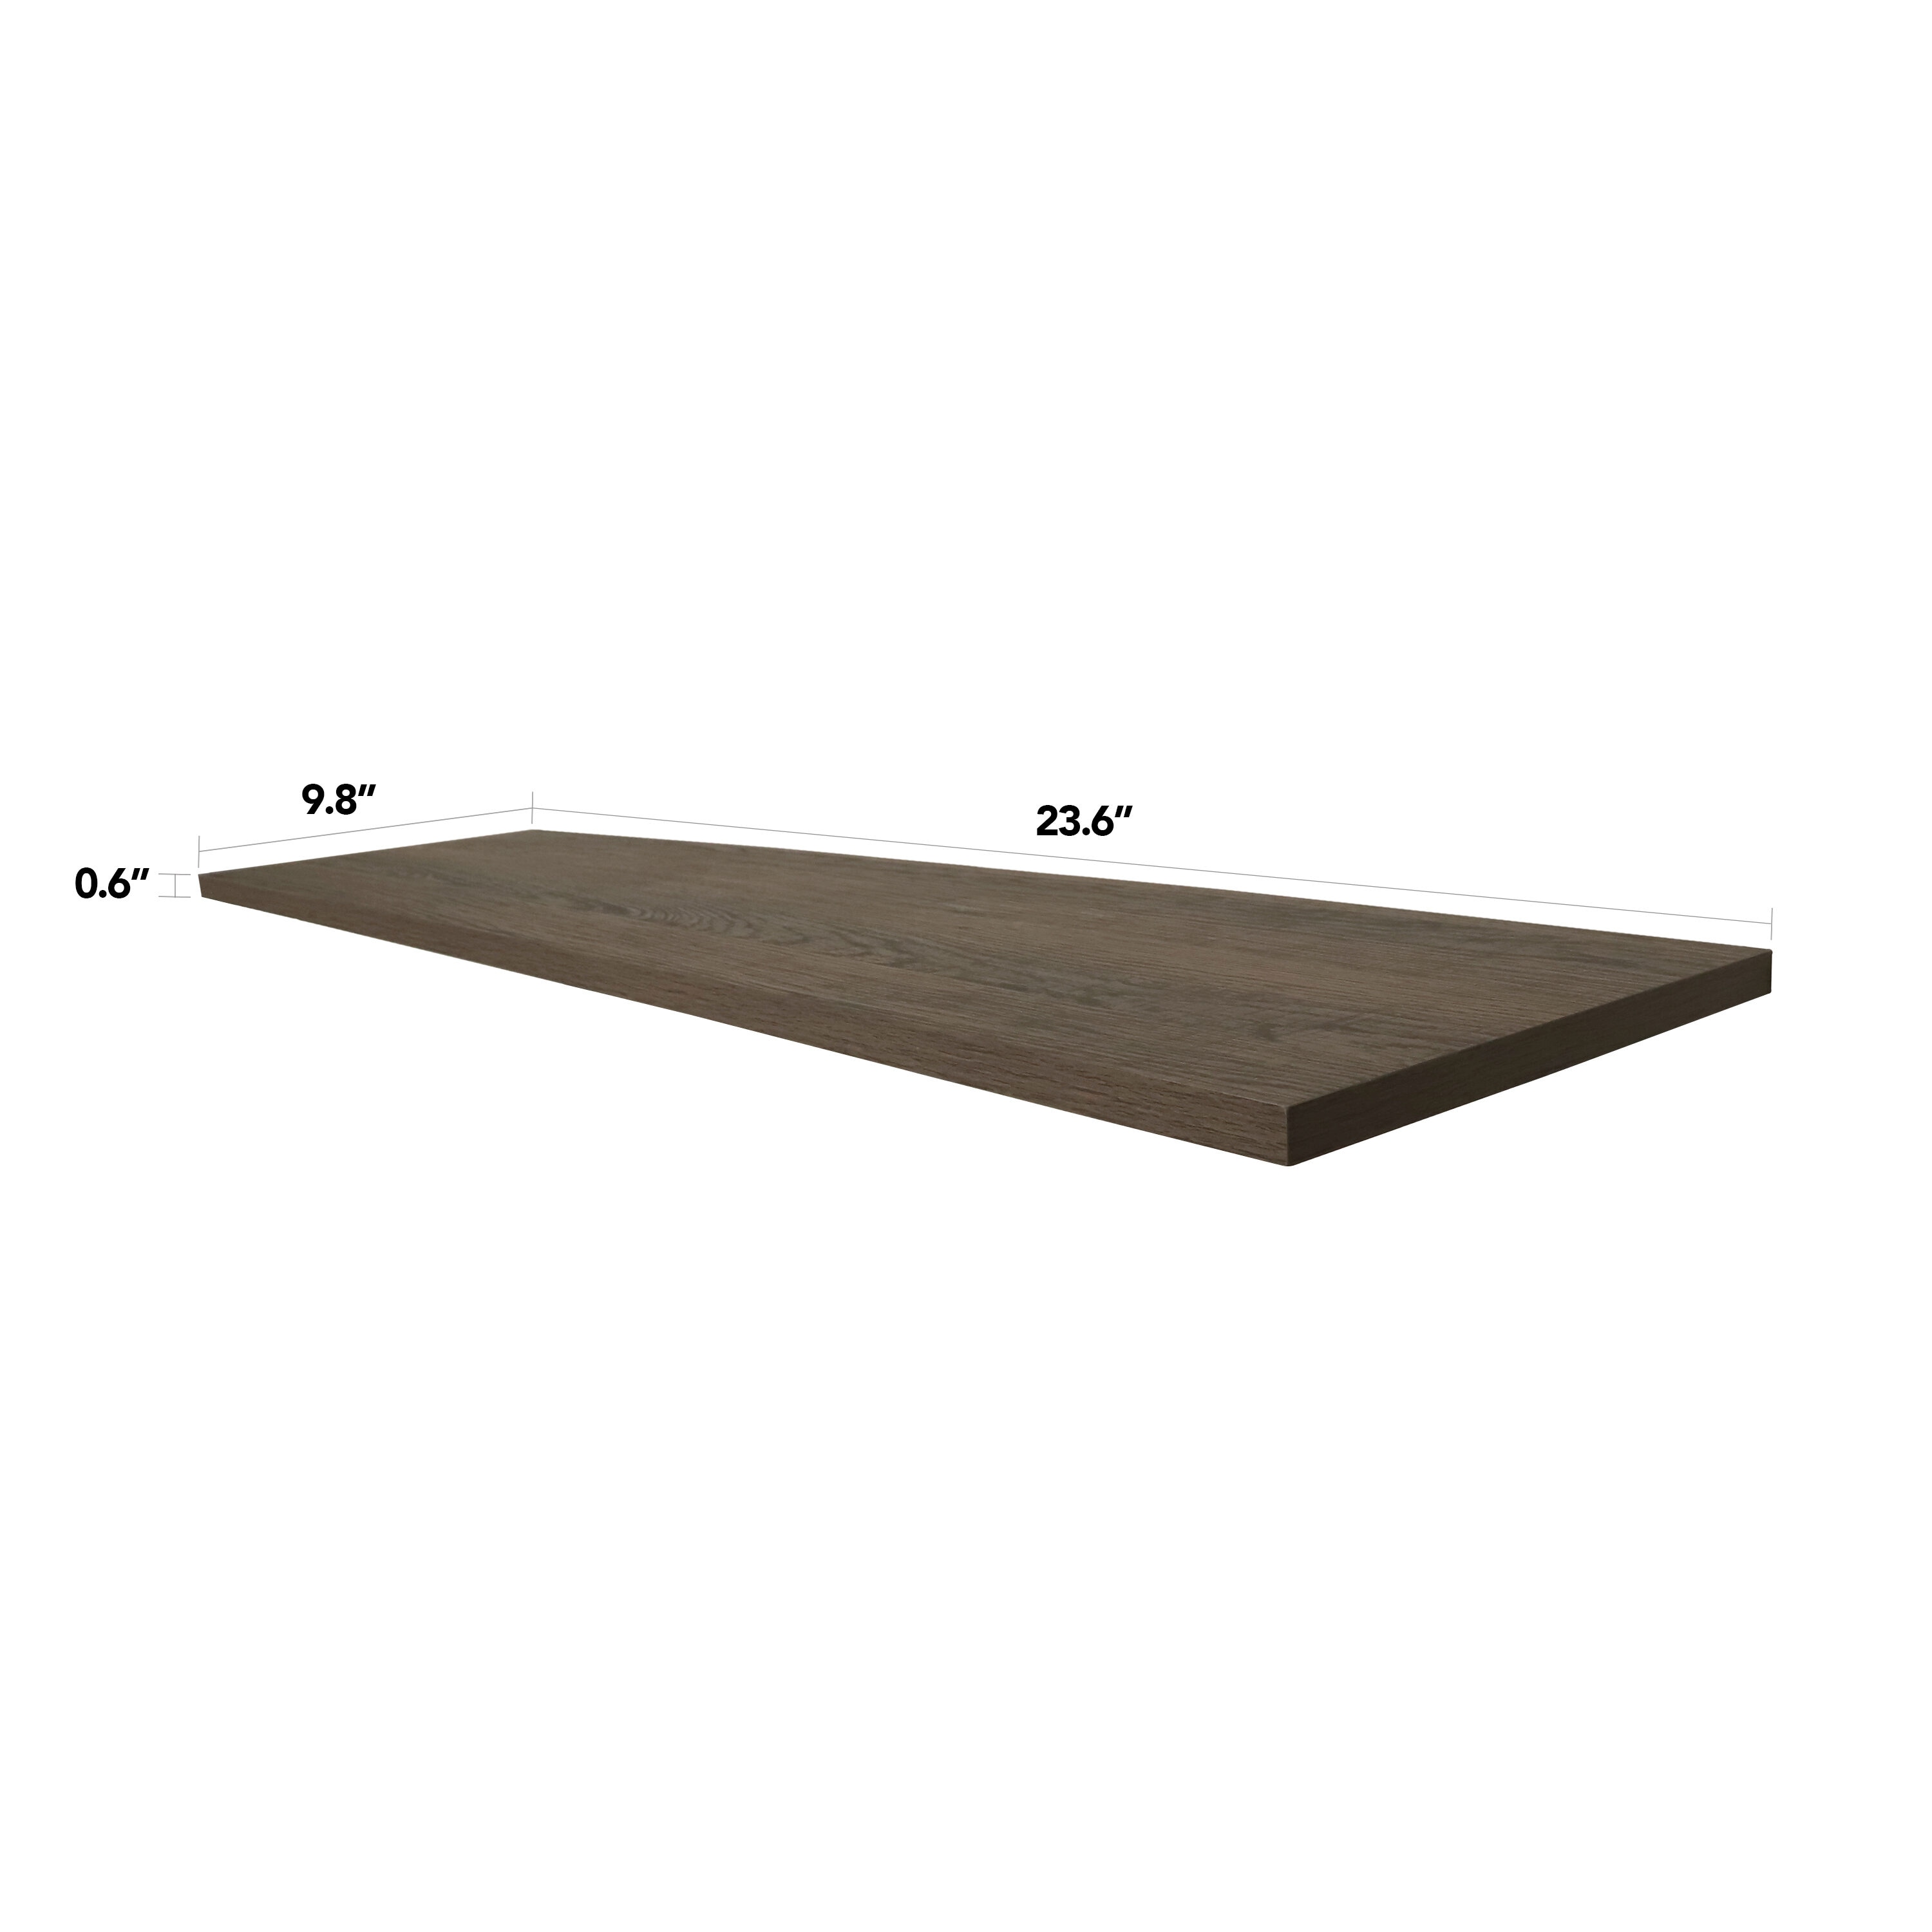 Style Selections 23.6-in L x 9.8-in D x 0.6-in H Dark Wood Rectangular ...